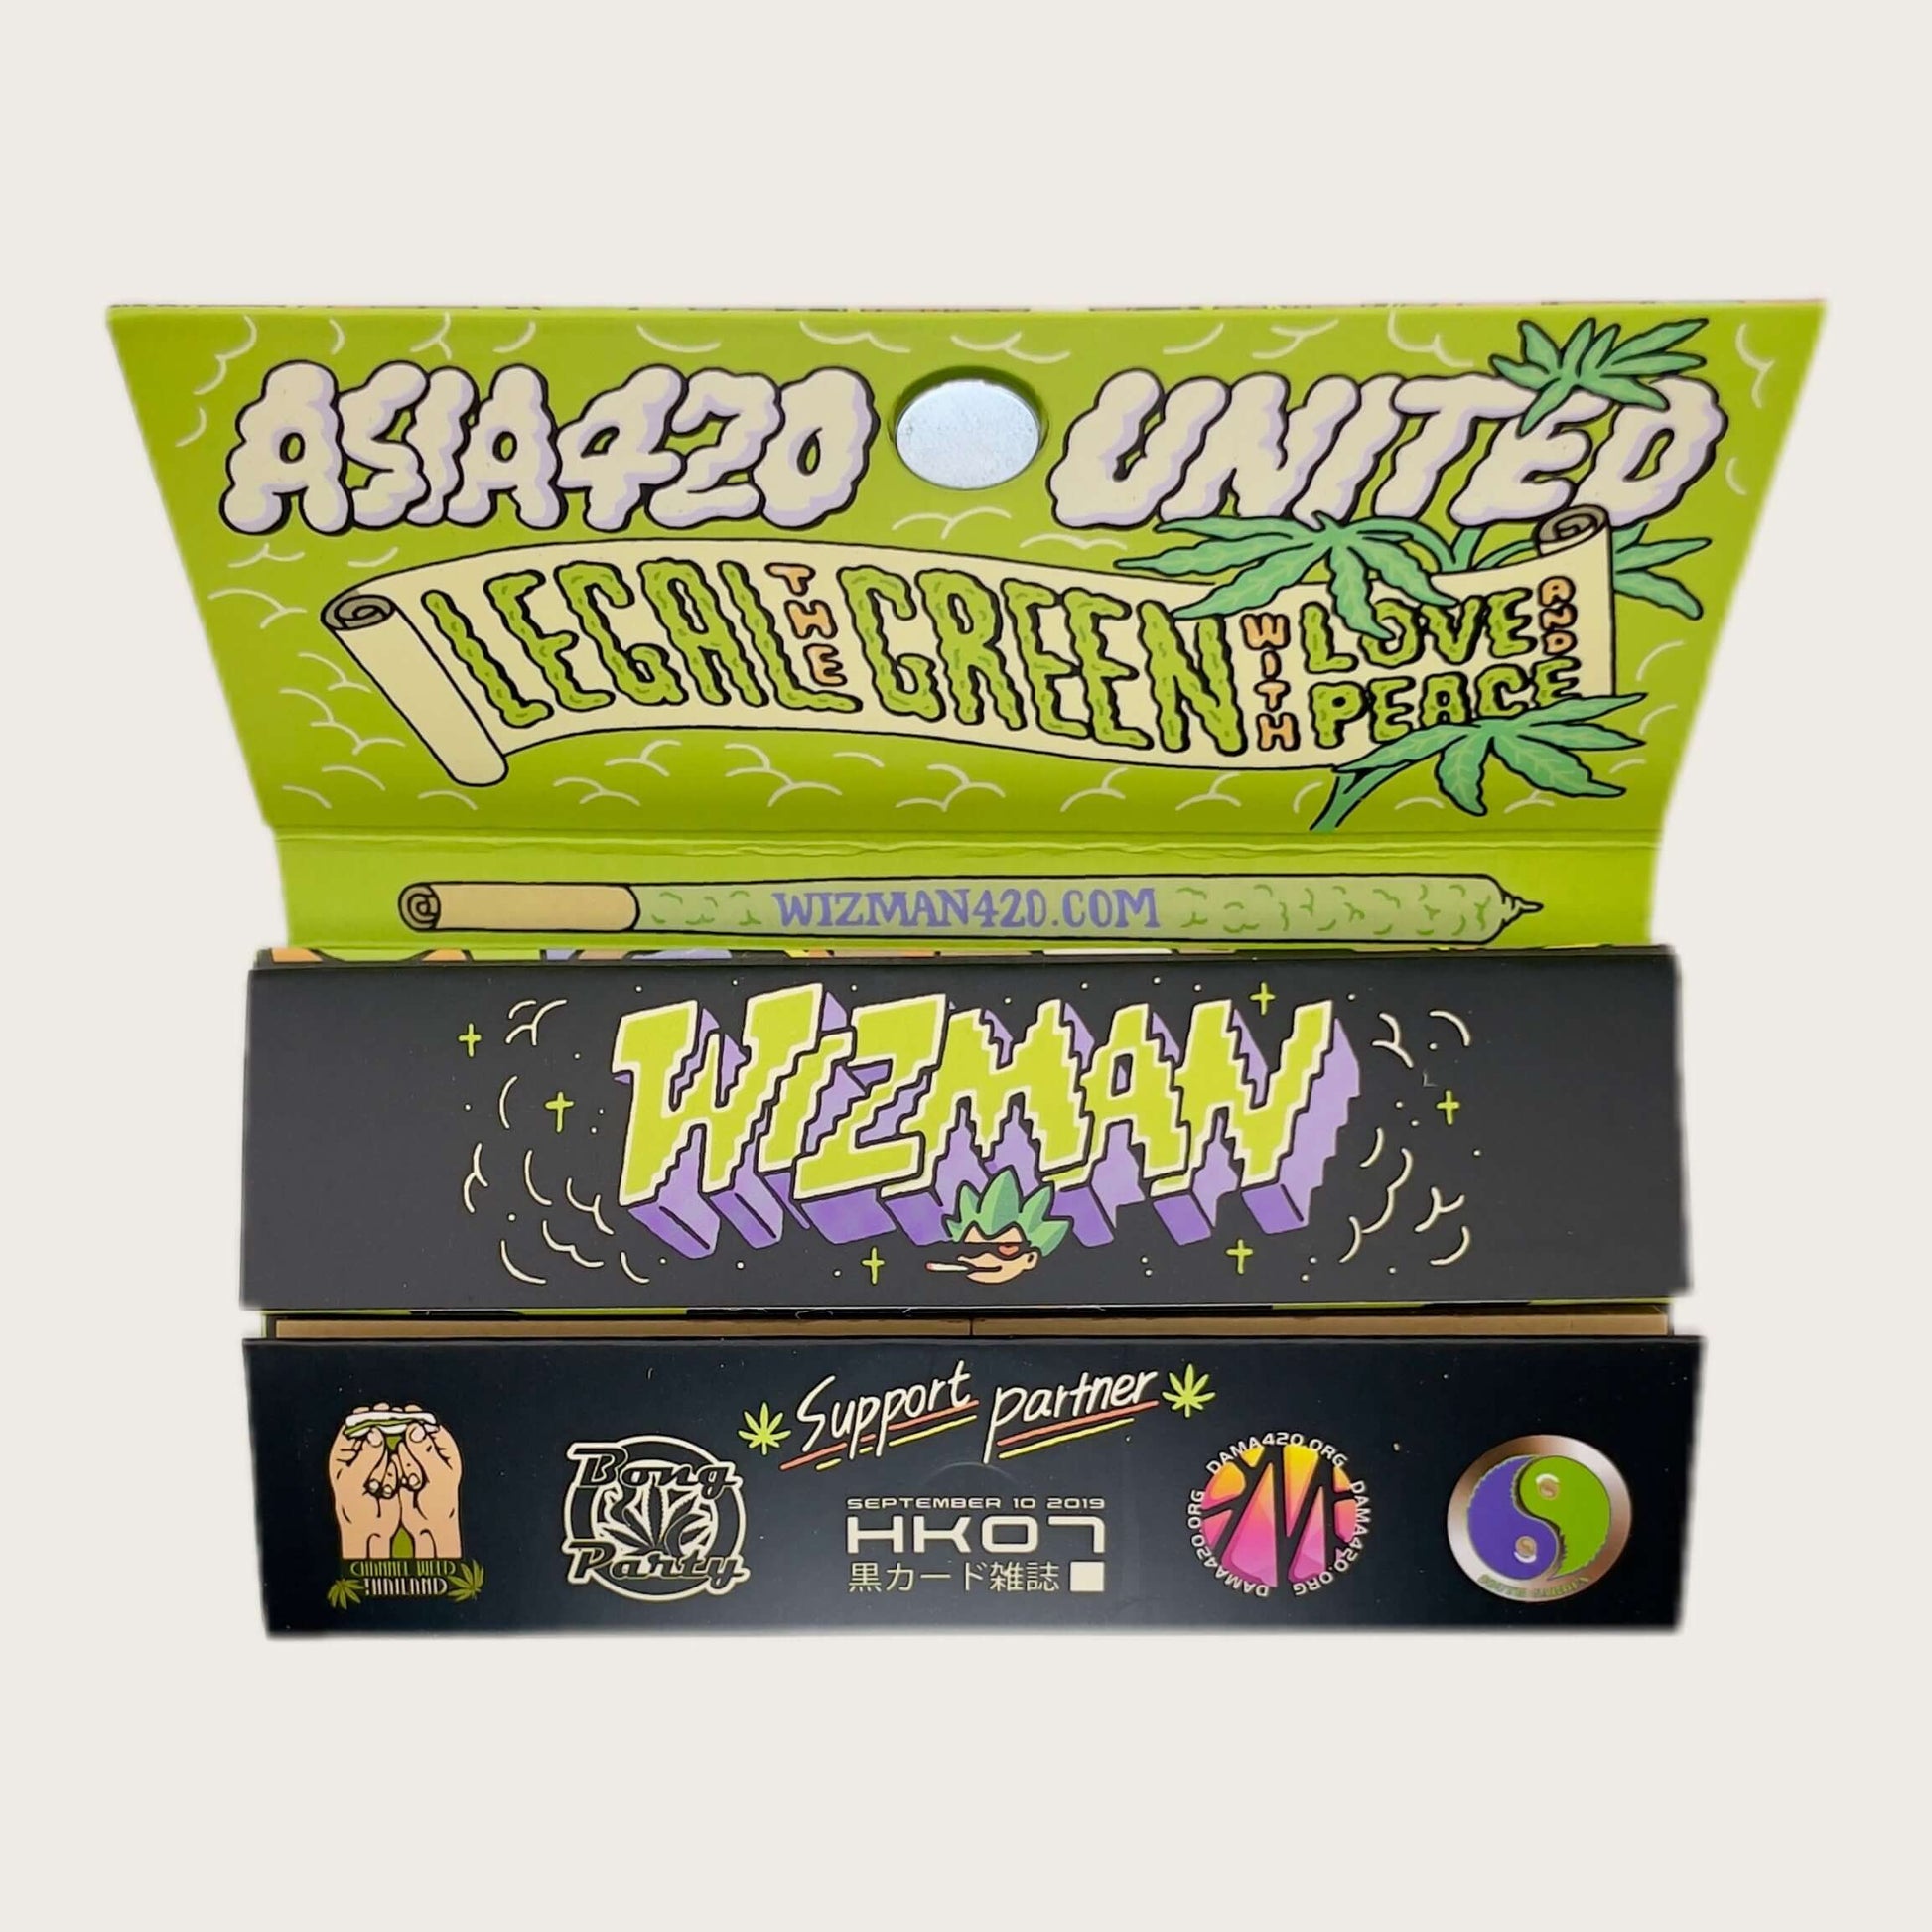 ASIA420 UNITED EDTION PAPERS + TIPS ACESSOIRES HOW HIGH CANNACON - THAILANDS PREMIUM CANNABIS DELIVERY 220.00 ฿